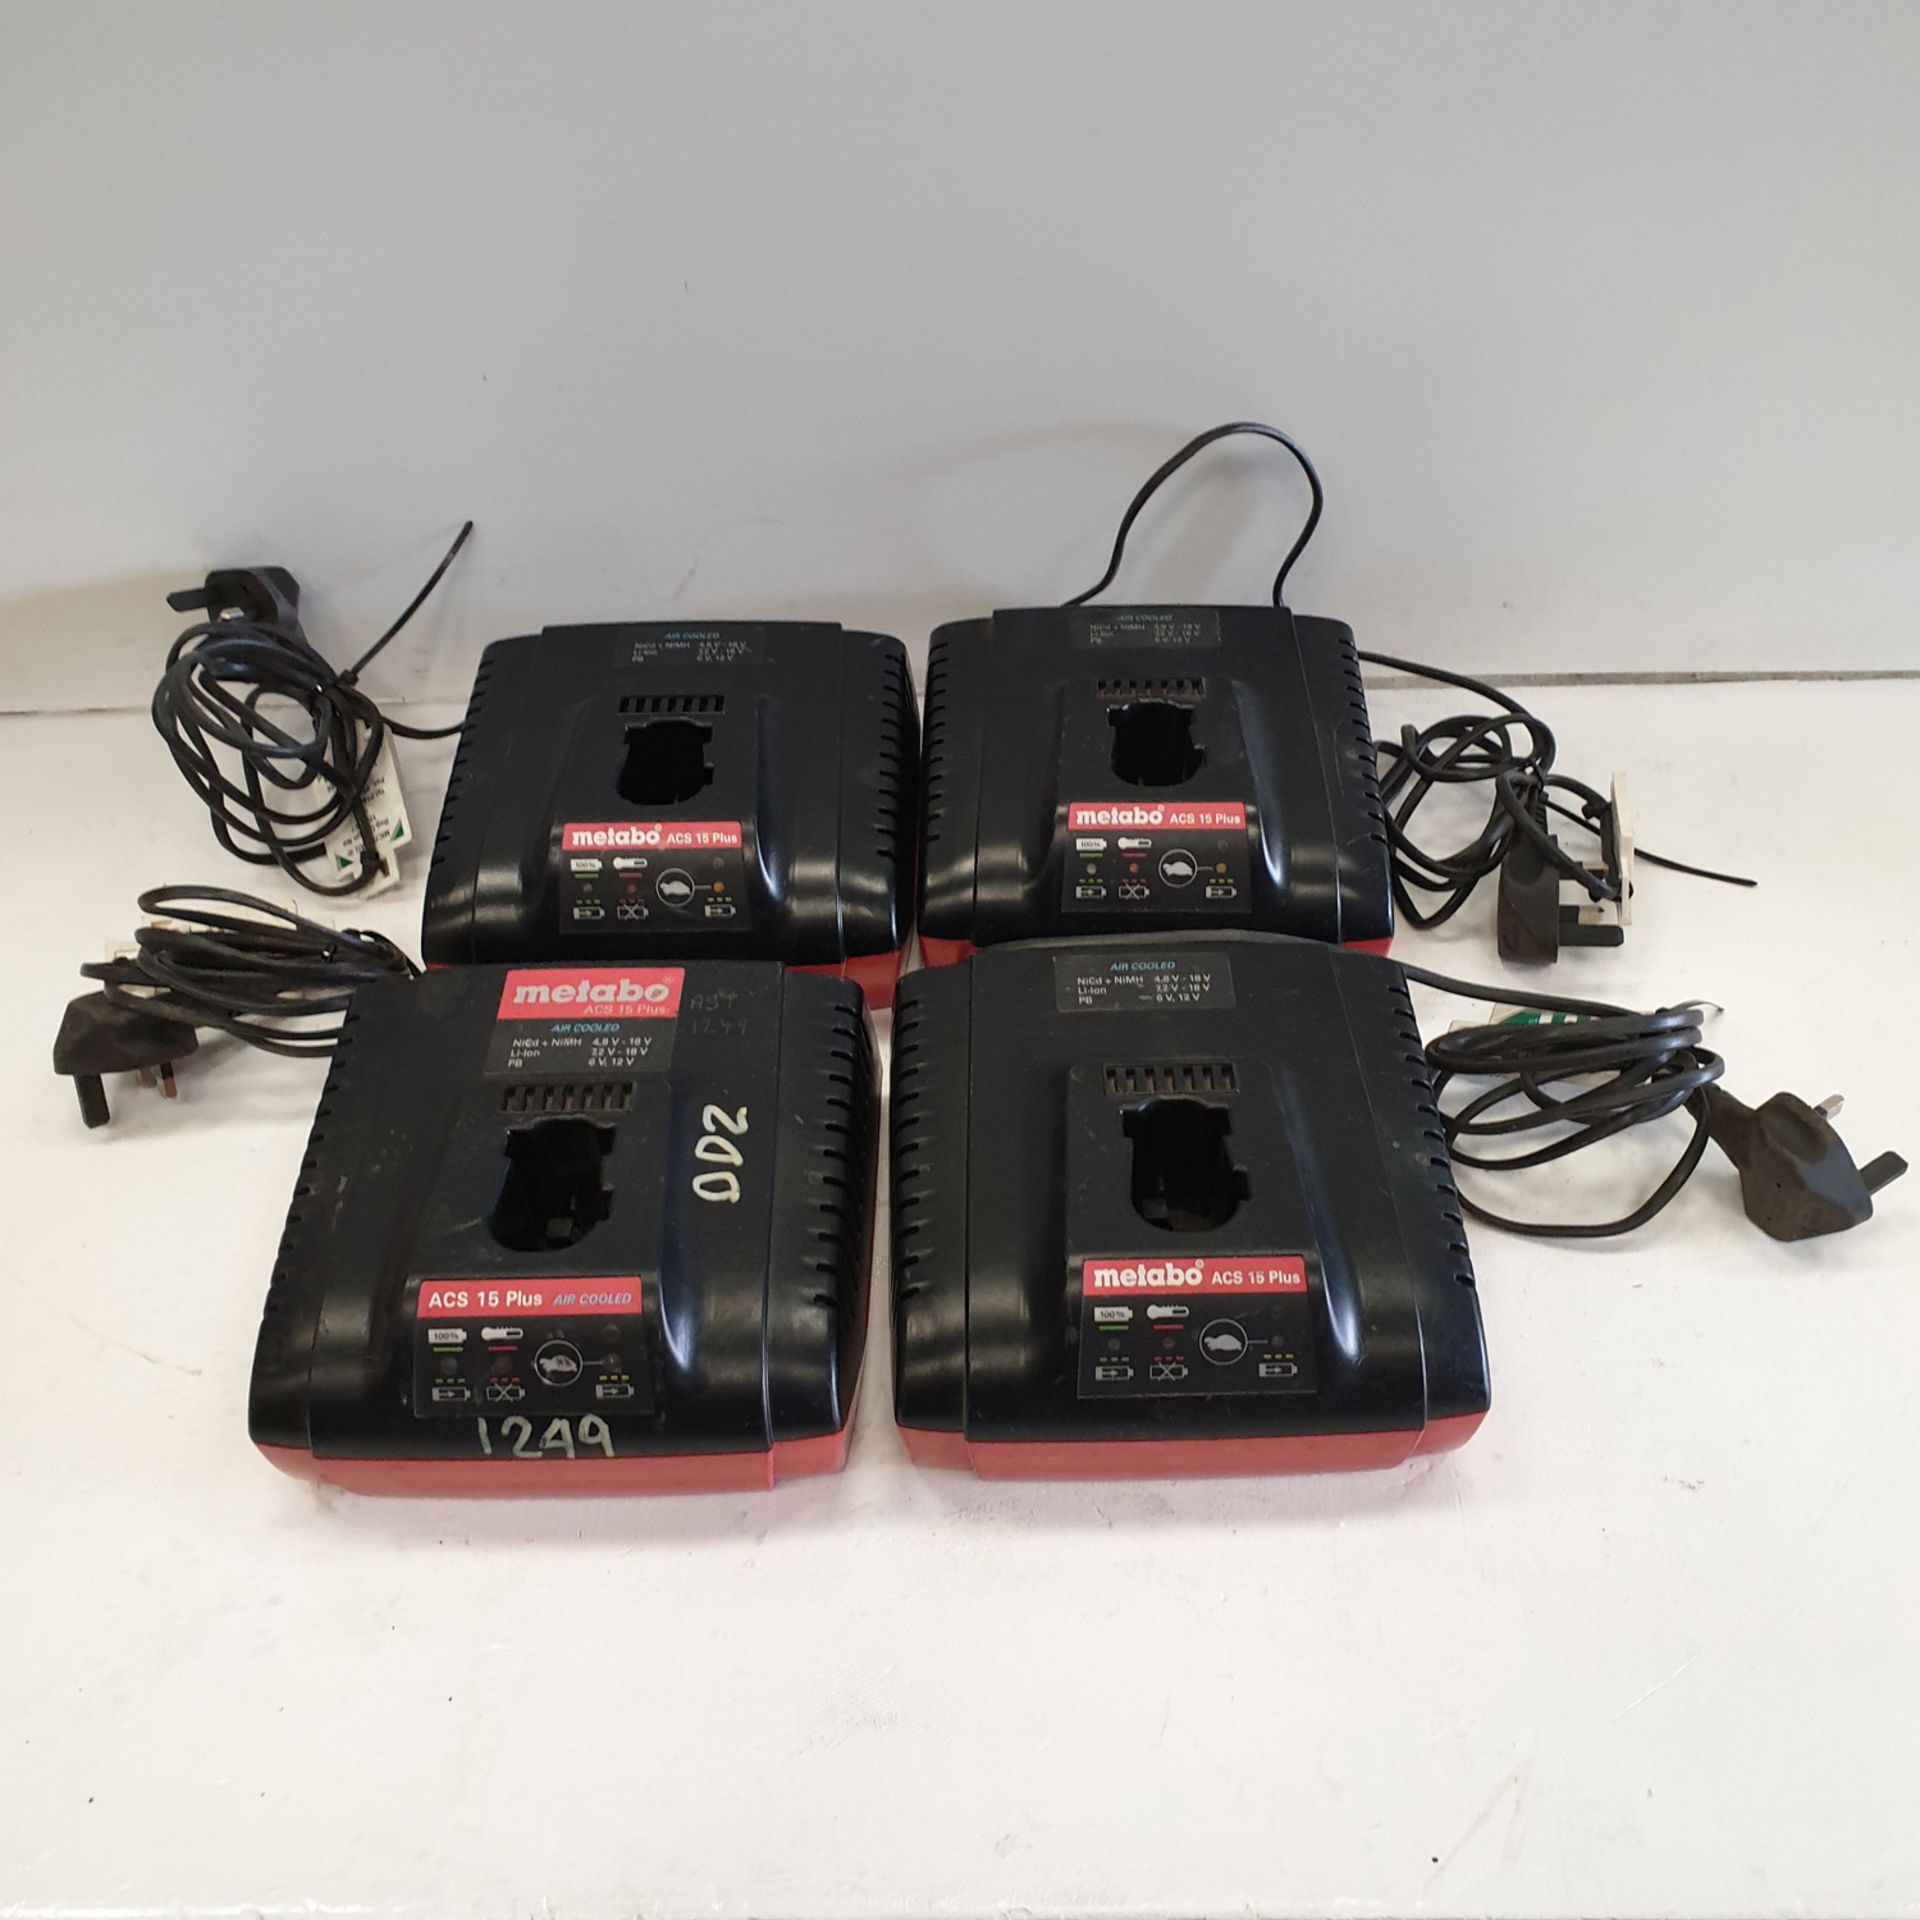 4 x Metabo ACS 15 Plus Battery Chargers. 220-240 Volt.